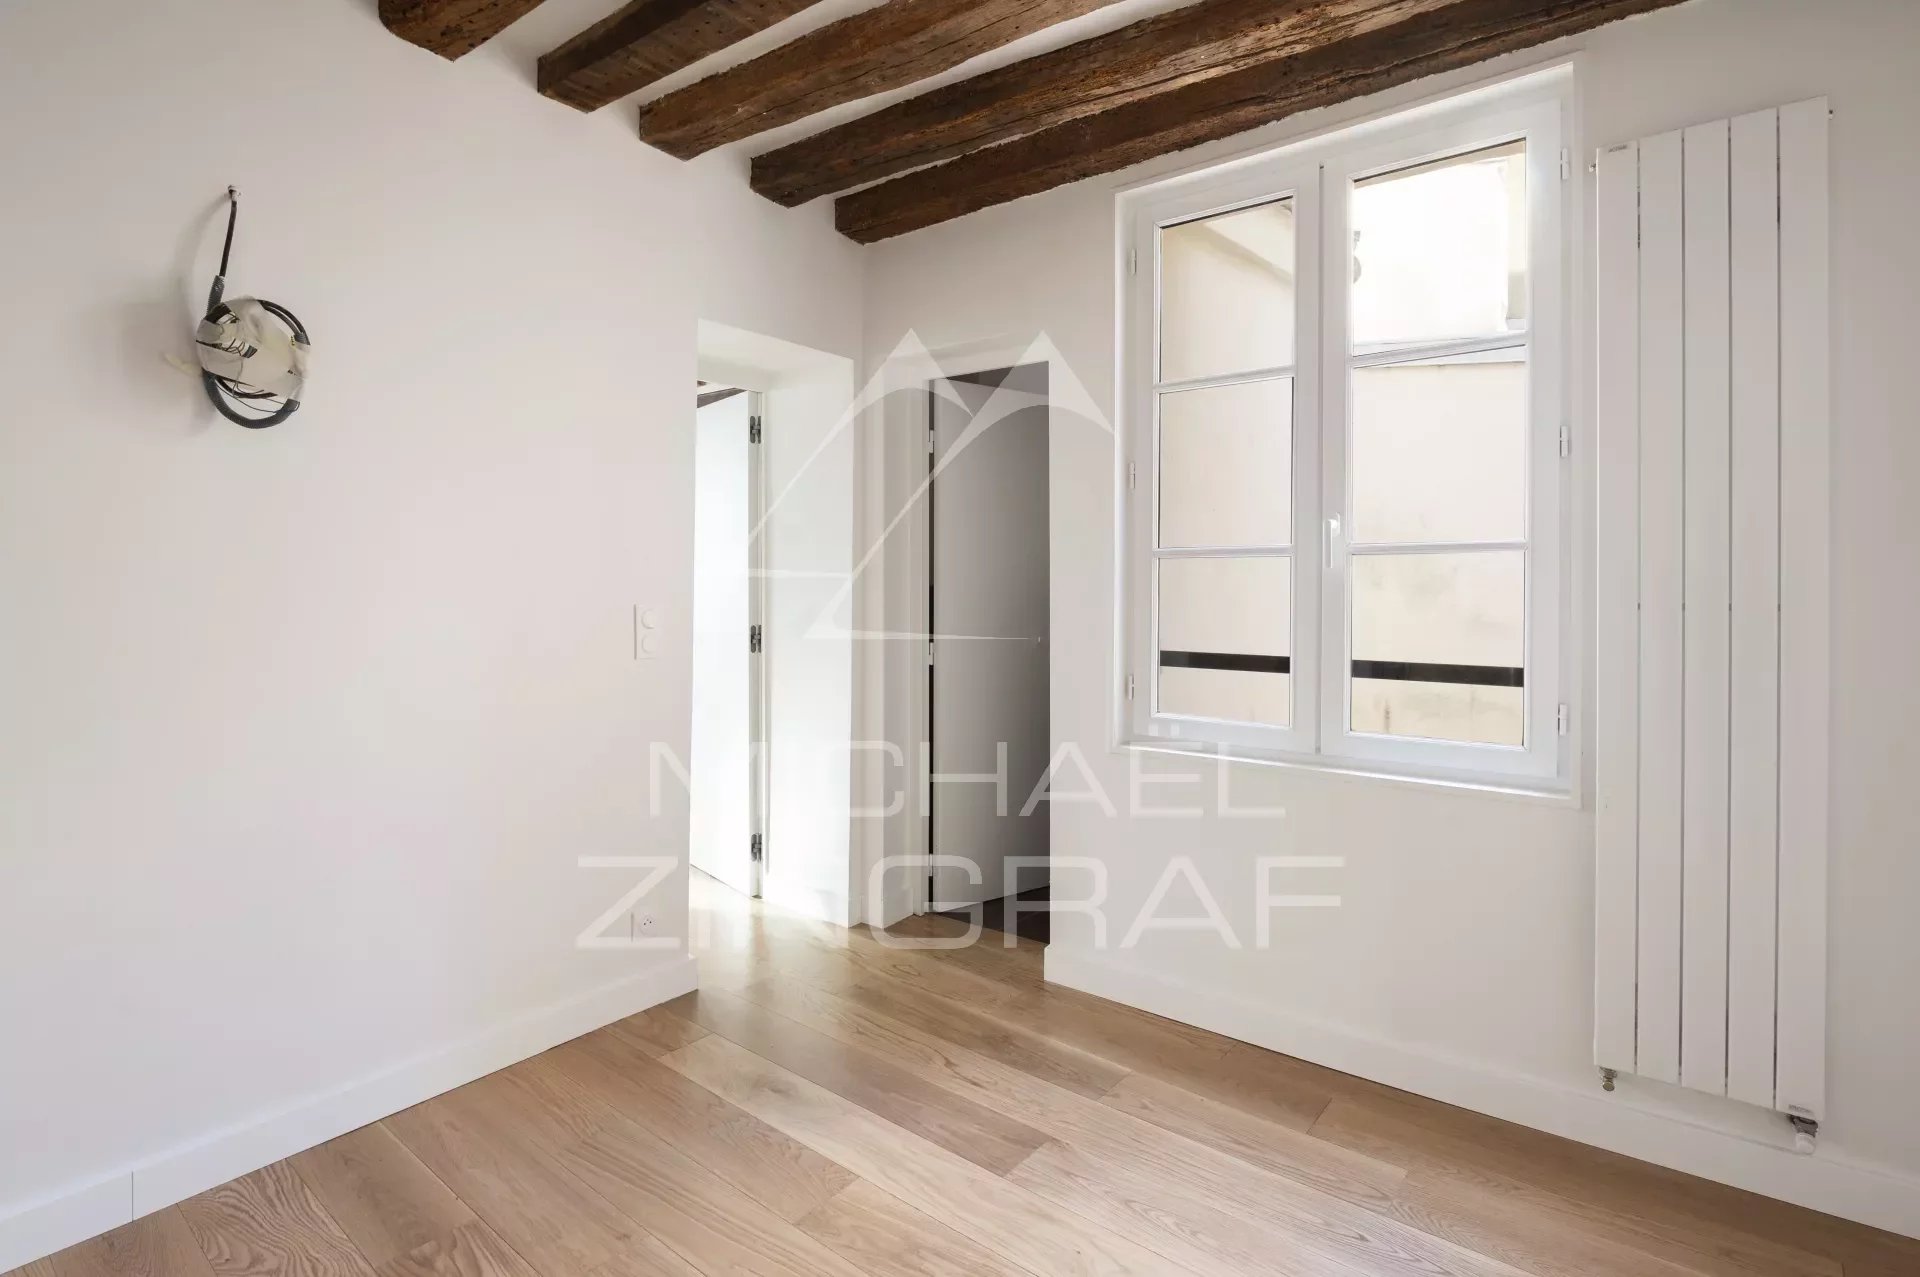 Prestigious building with commercial and residential sections in the Marais district